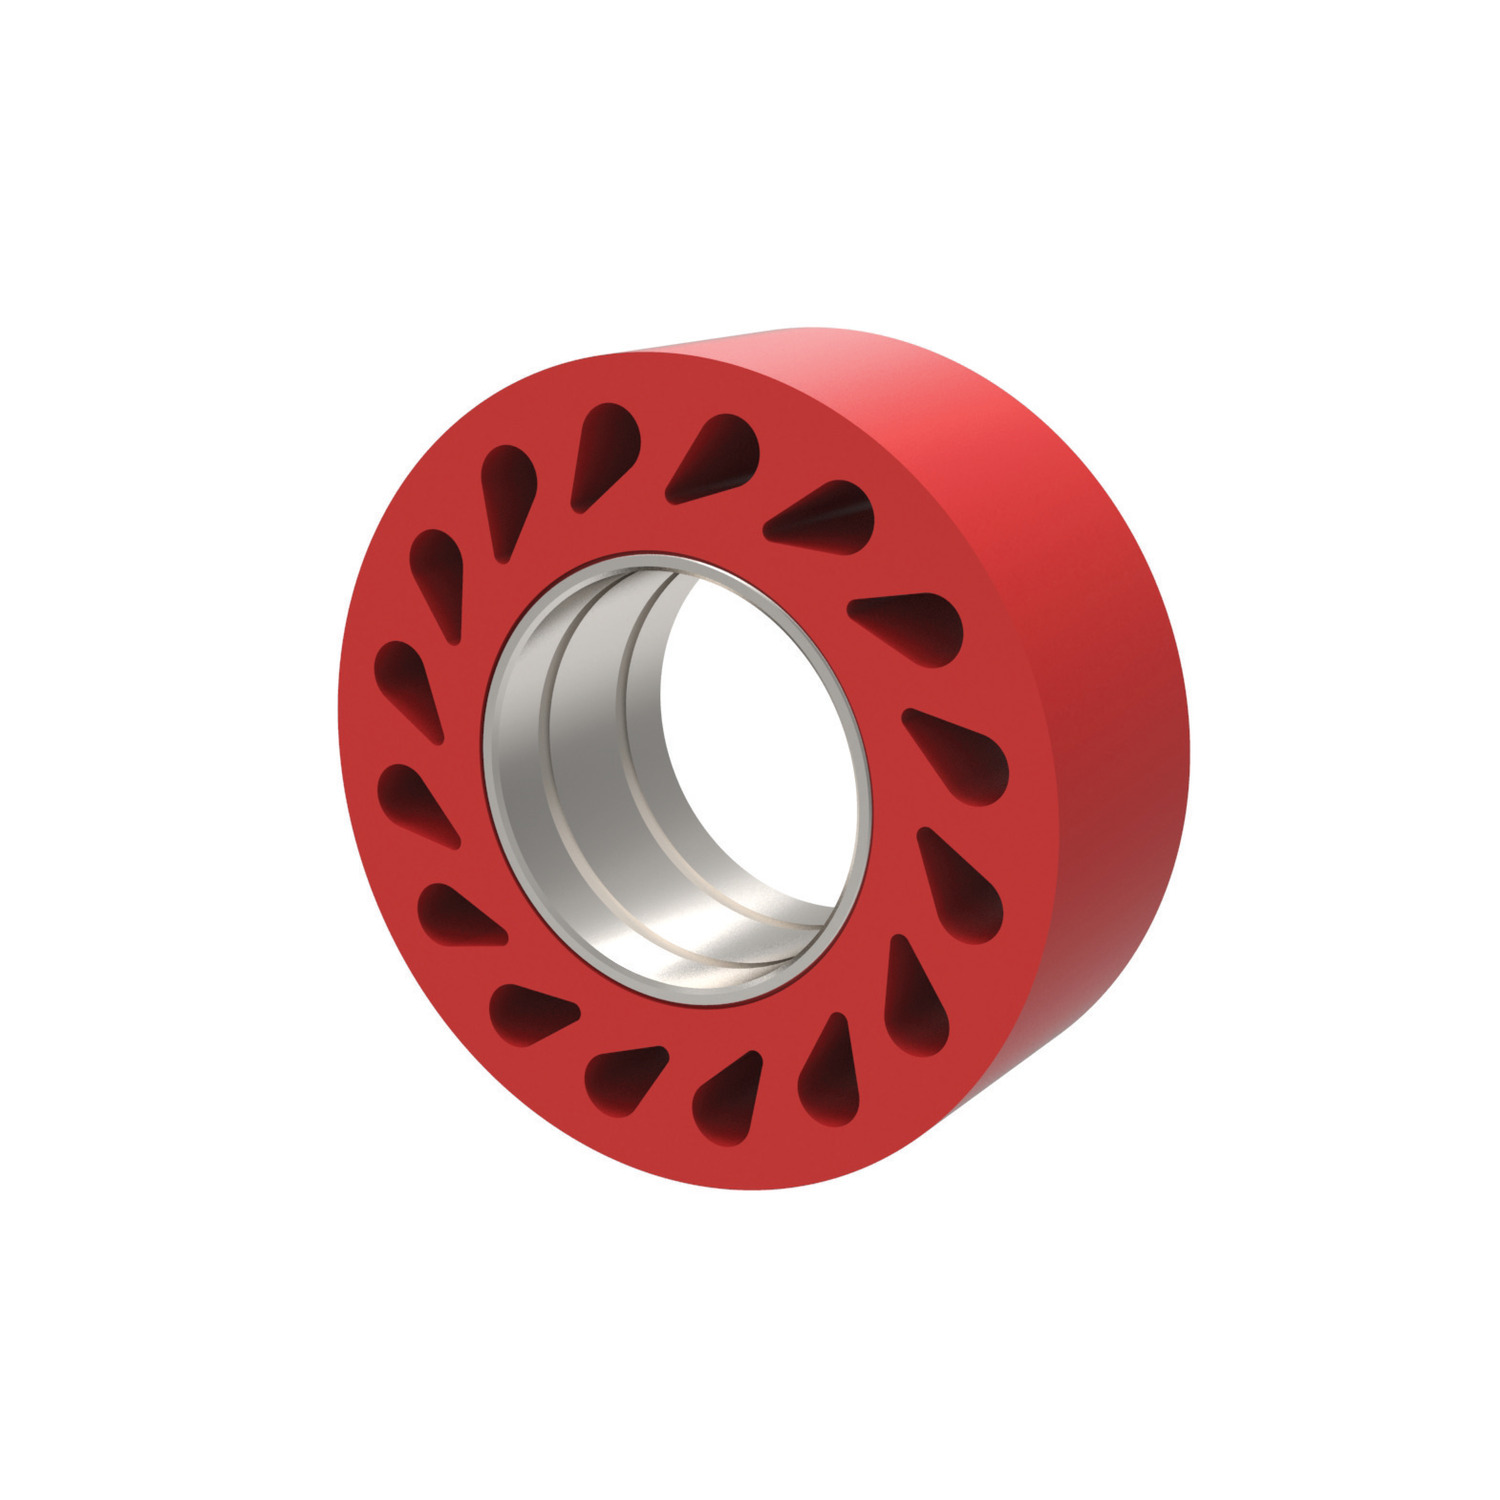 Durasoft Roller Durosoft rollers have "teardrop" holes to allow the roller to flex for firm but non-damaging contact.